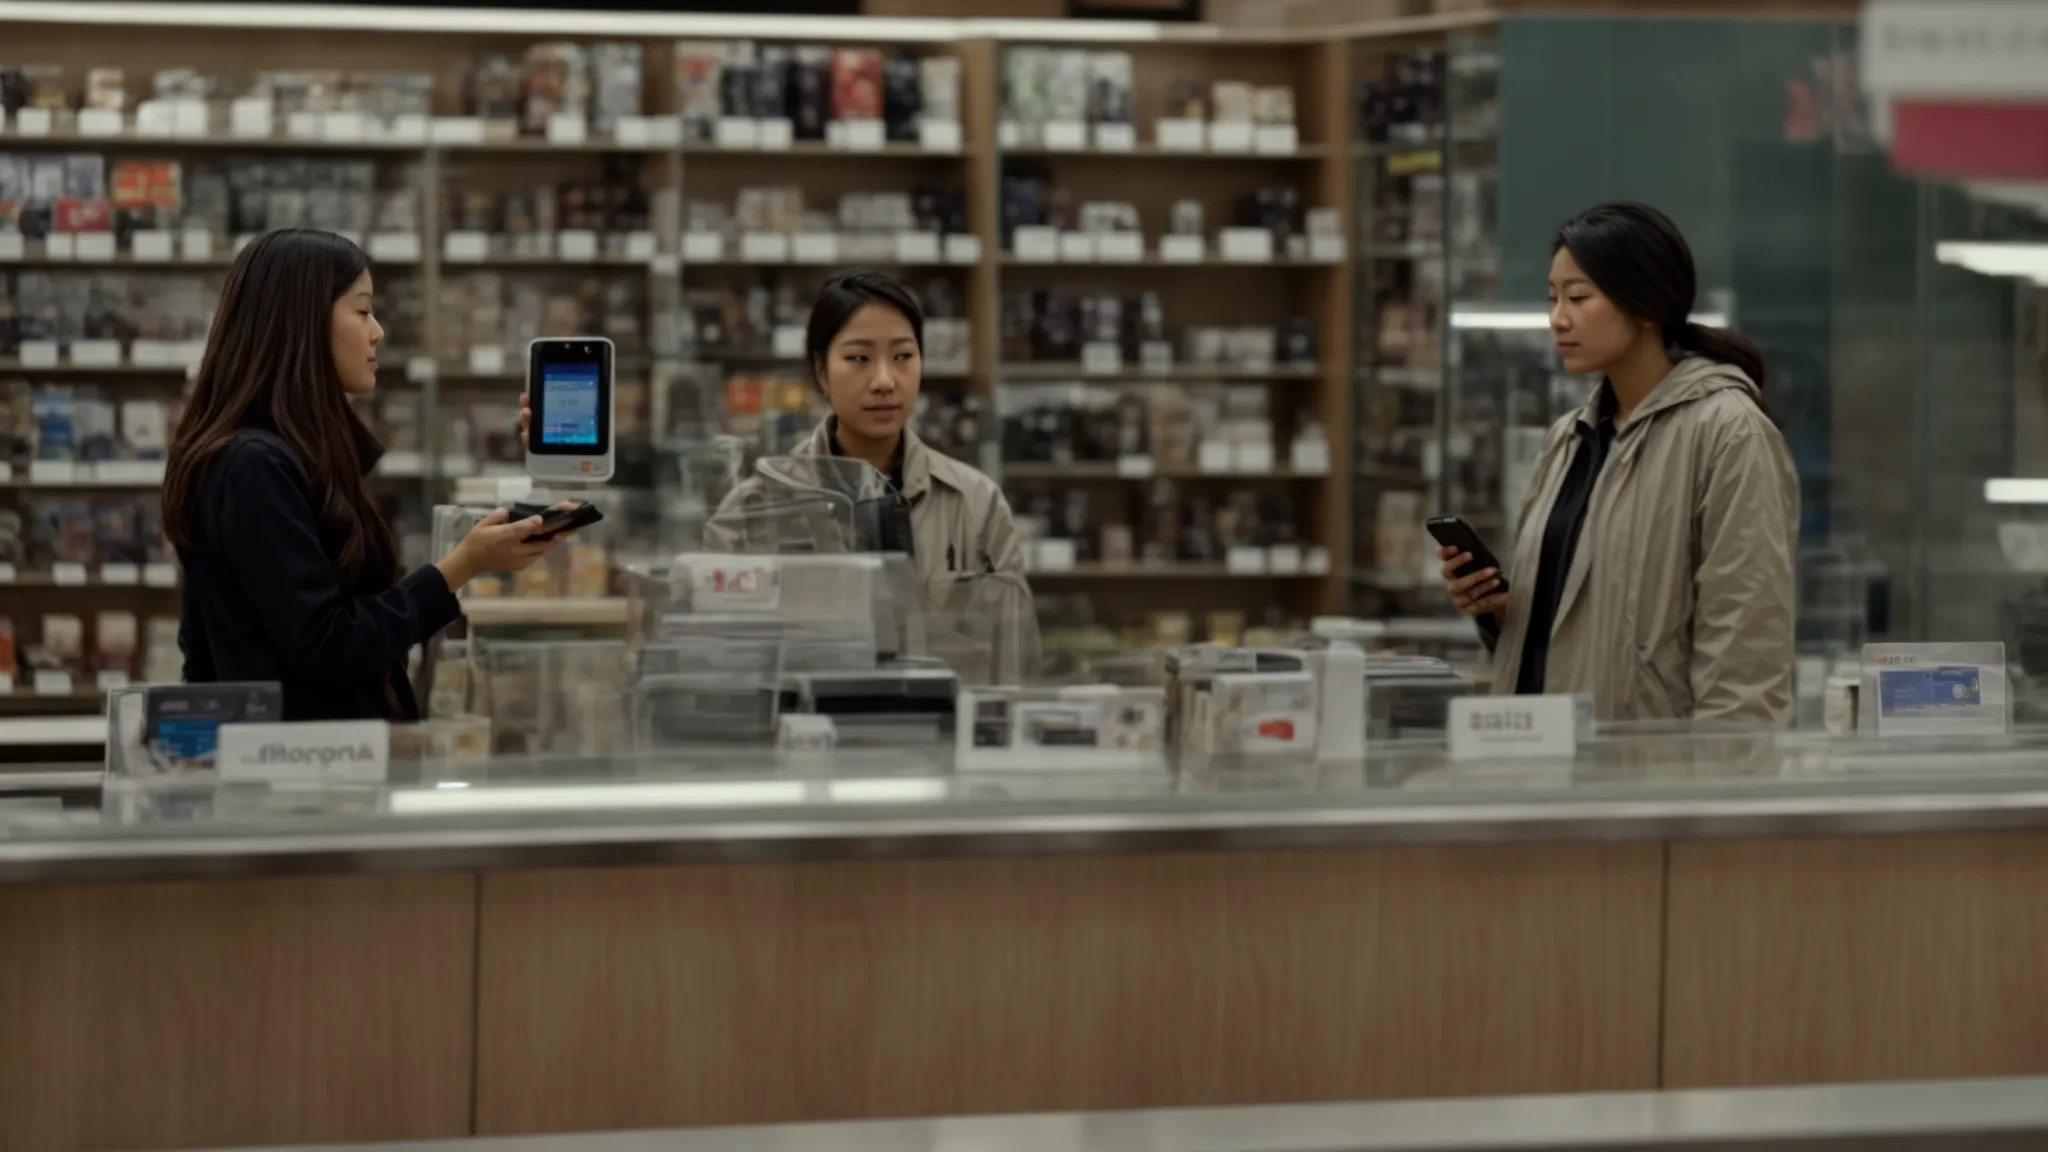 a shopper talks to a store employee across a counter filled with various cell phone models.